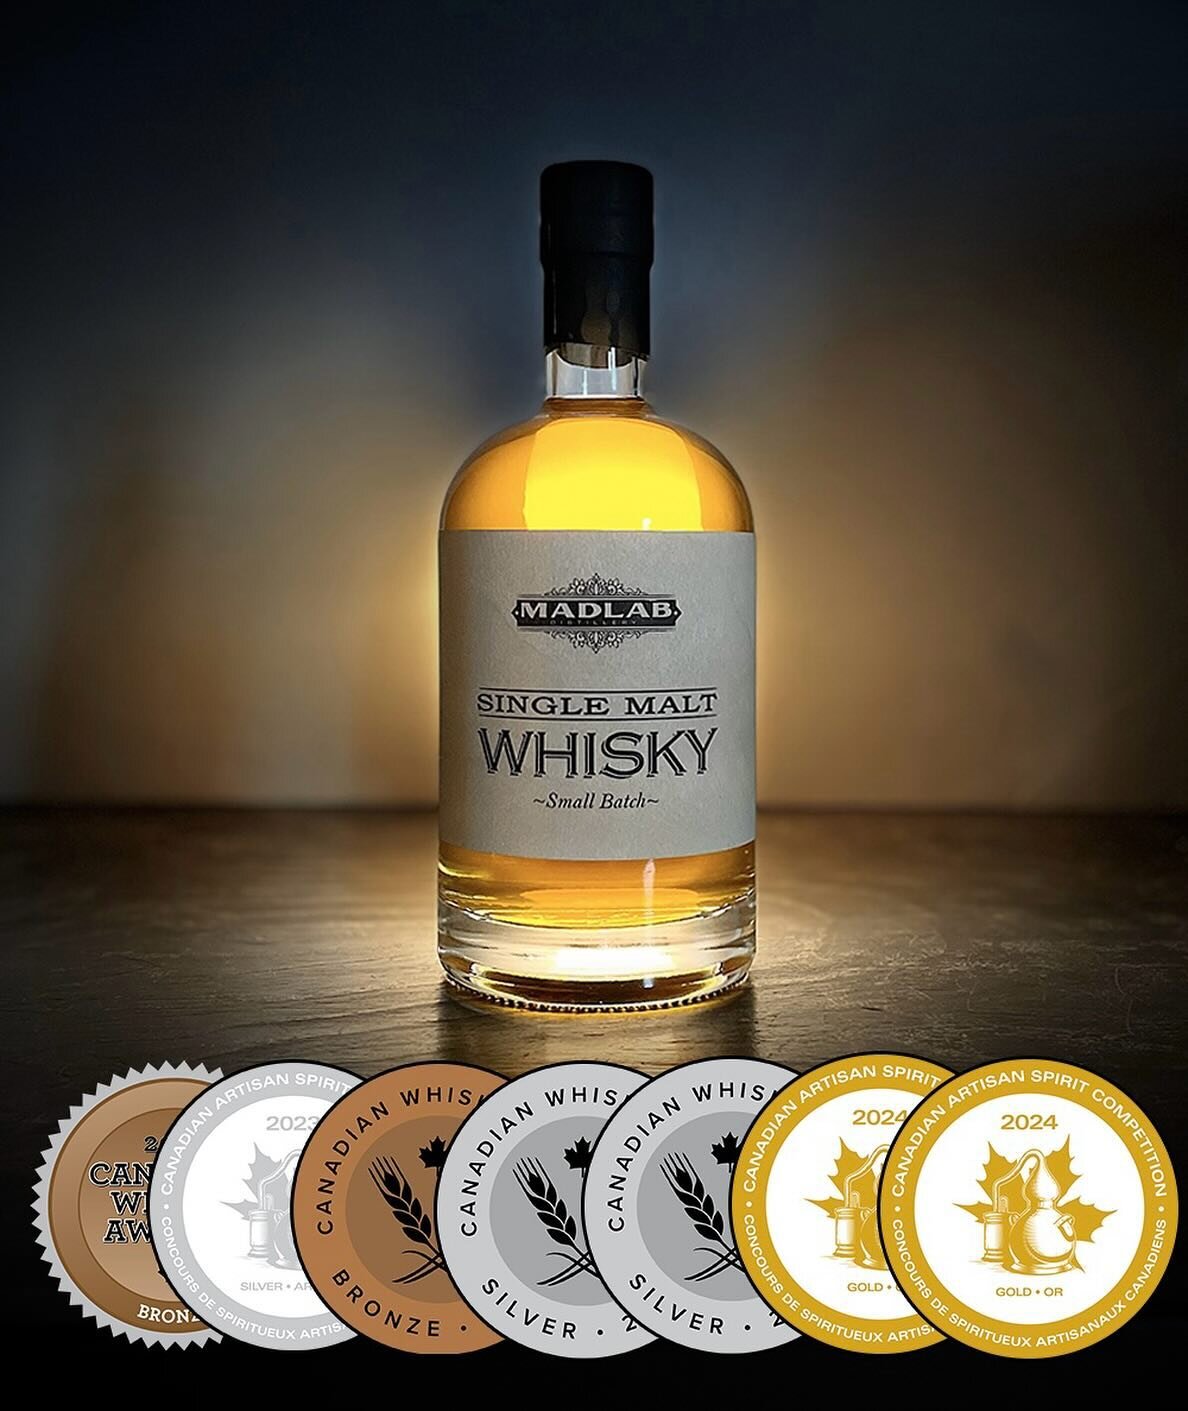 If you blinked you might have missed it, in just 2 years we&rsquo;ve managed to pick up an incredible amount of hardware for our single malt whisky. For such a small distiller, we are so incredibly proud of what we have accomplished. 

If you are int